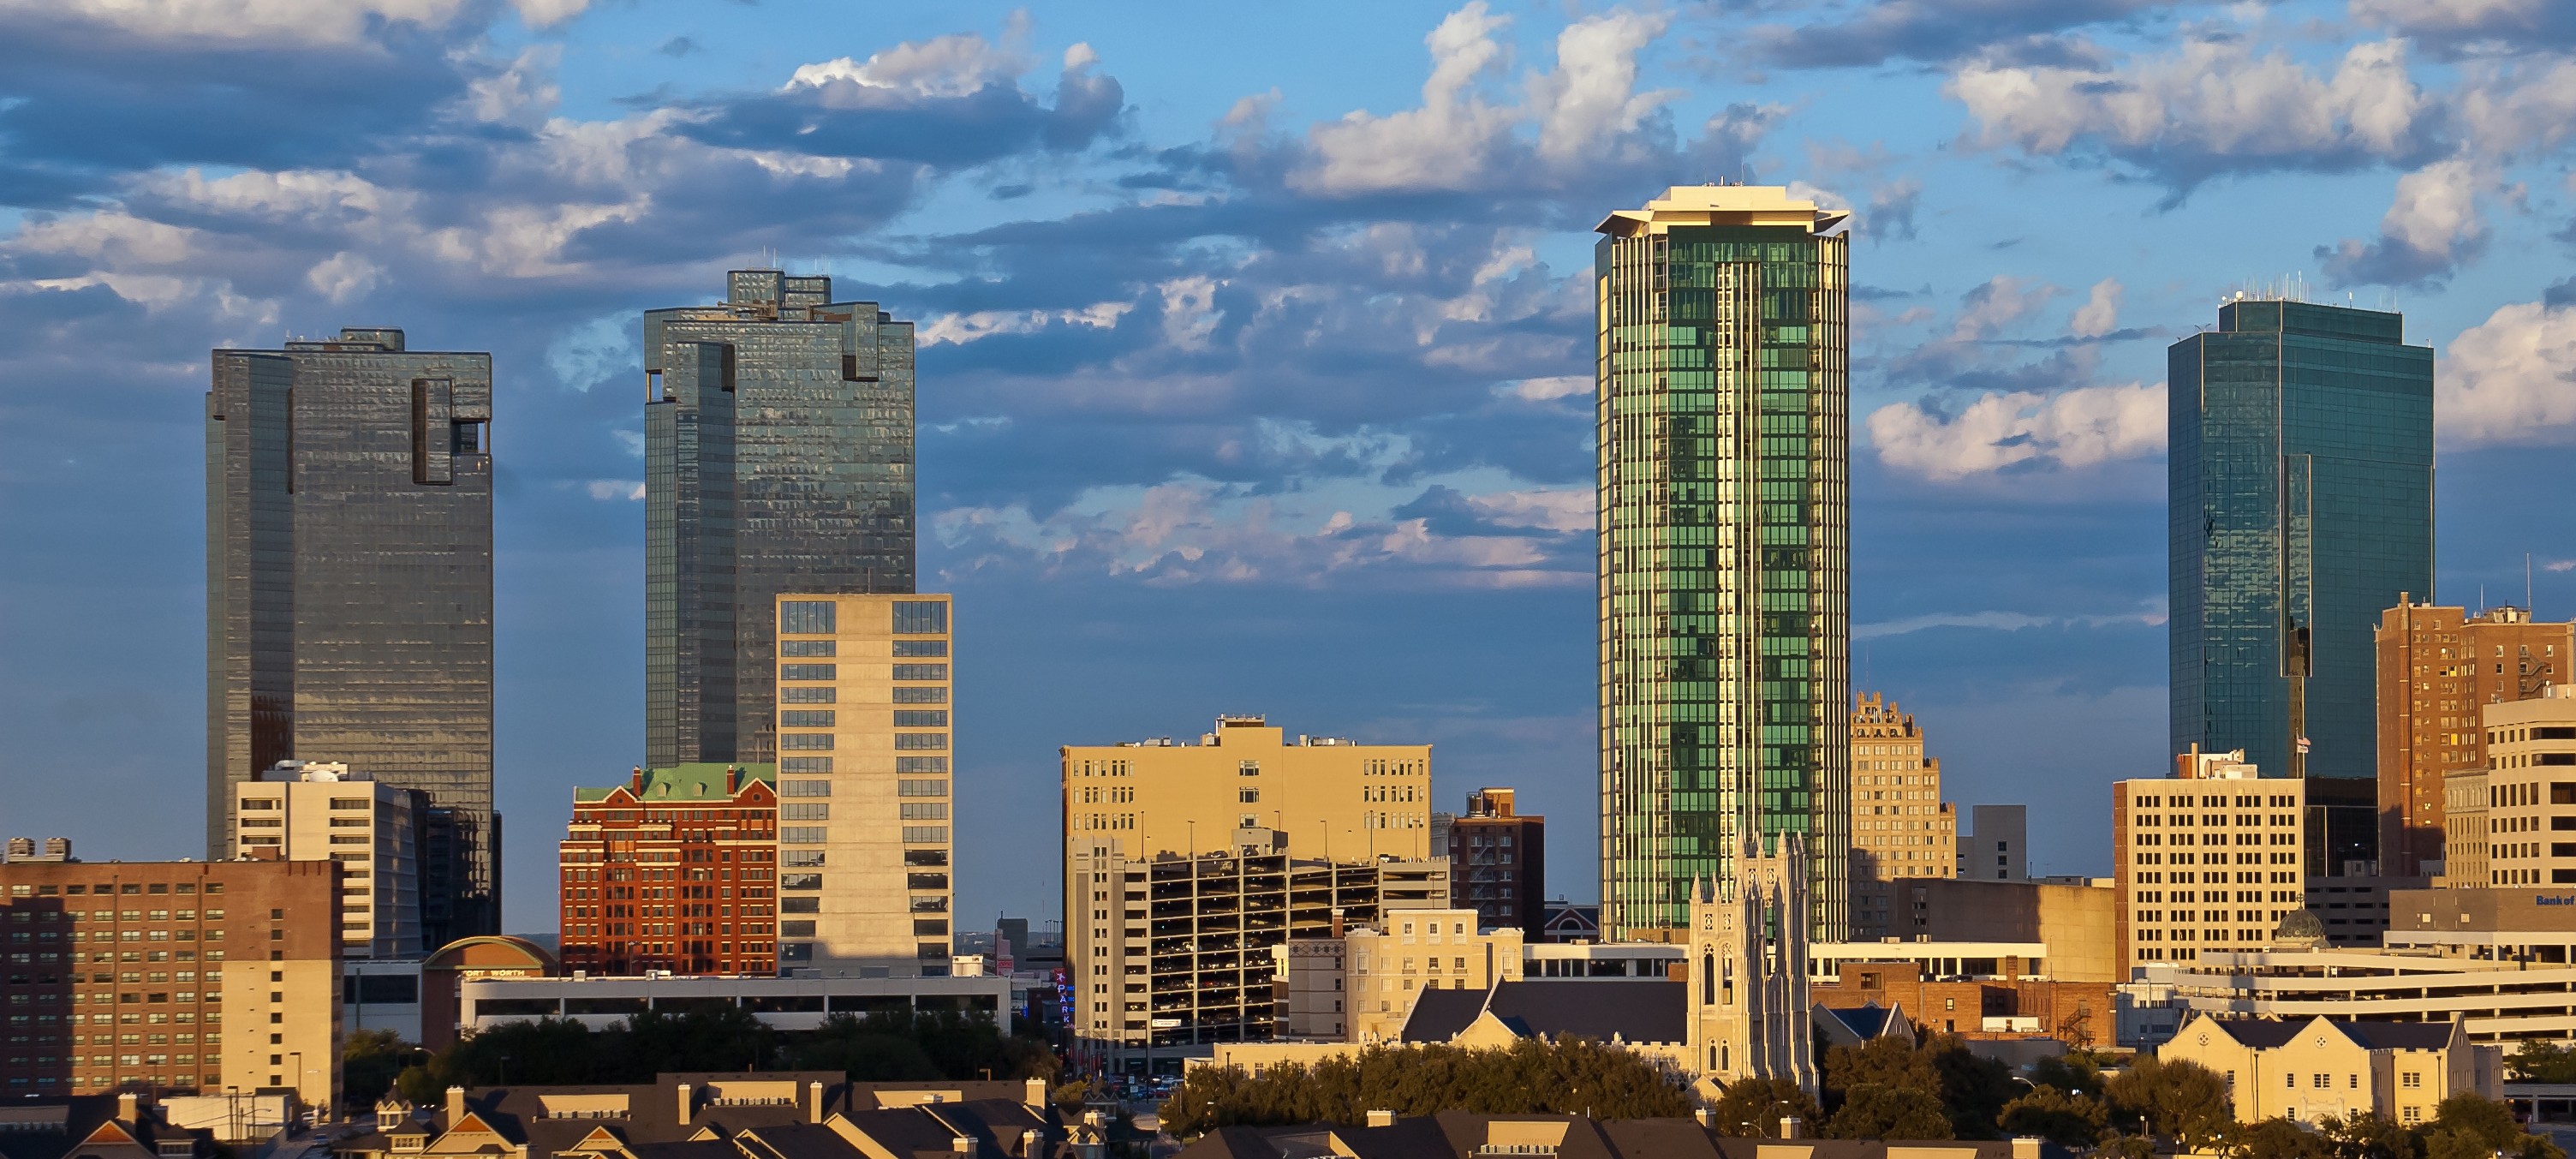 Cityscape of Fort Worth Texas in early evening light